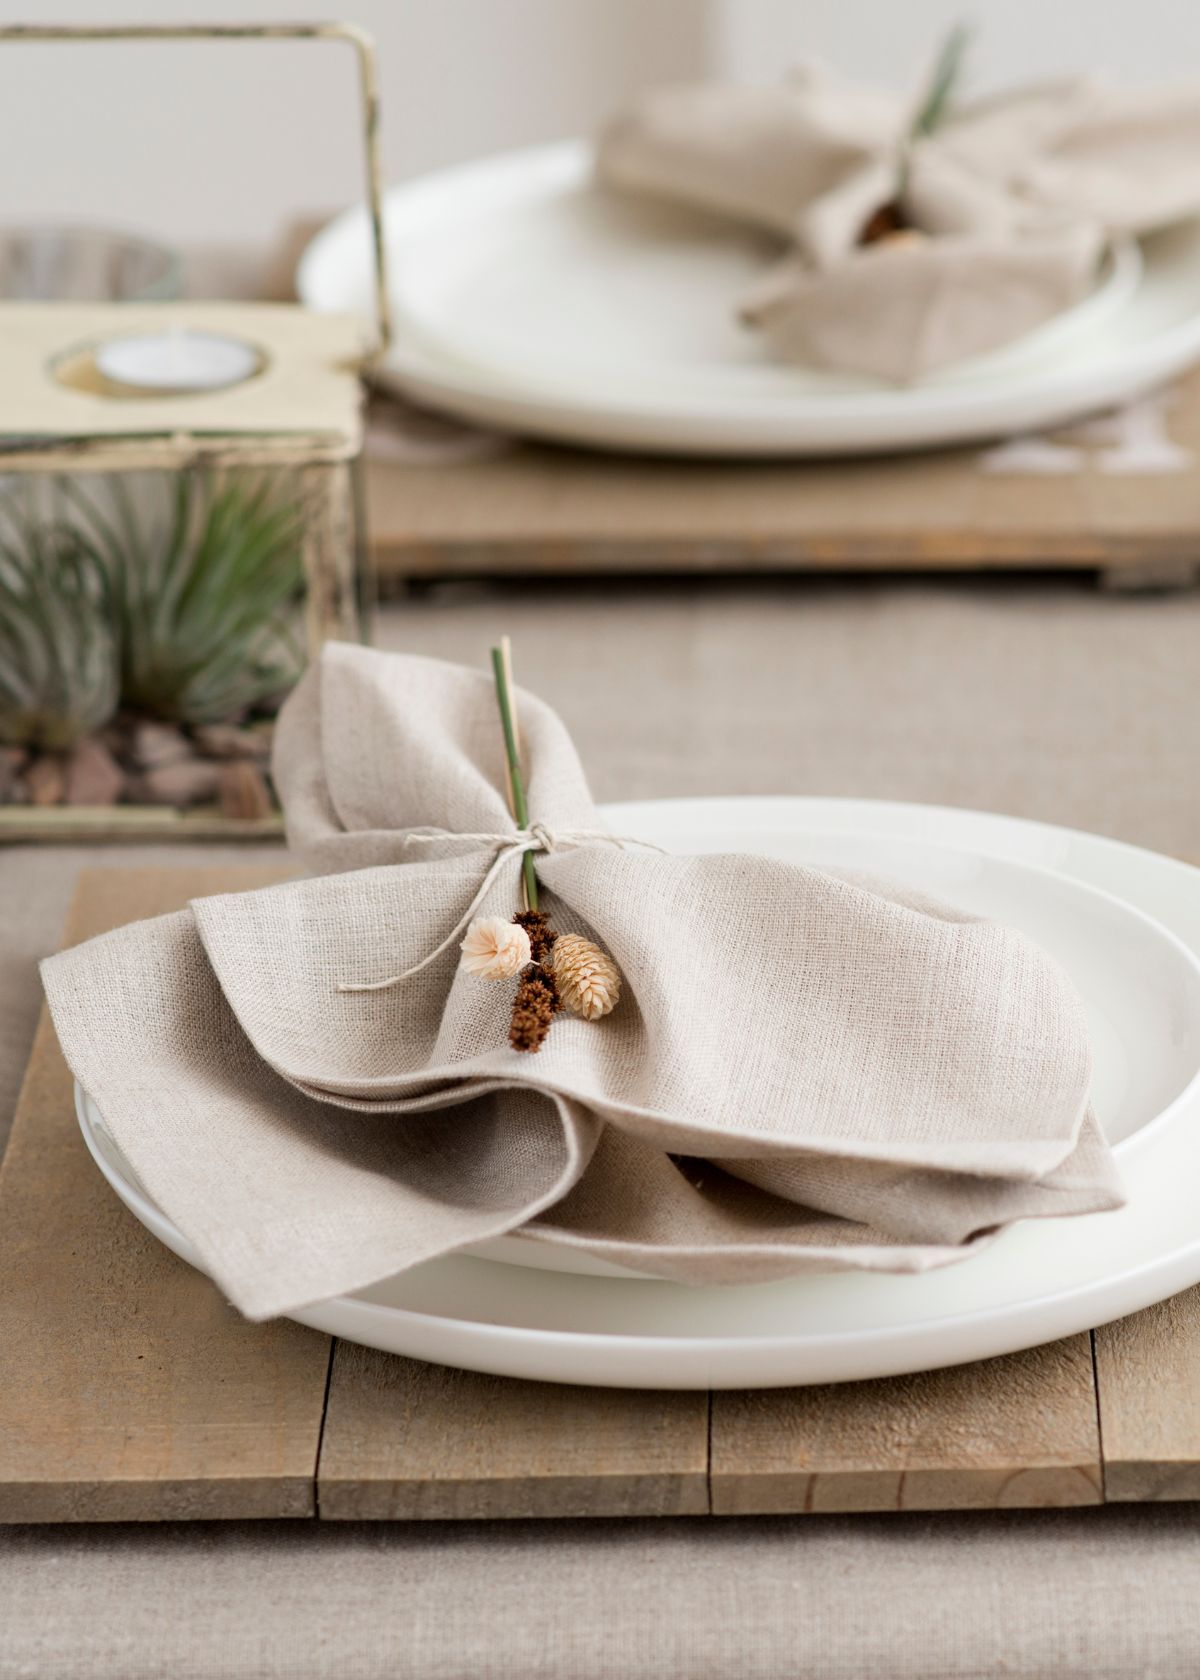 Episode #025: Making the Switch to Cloth Napkins